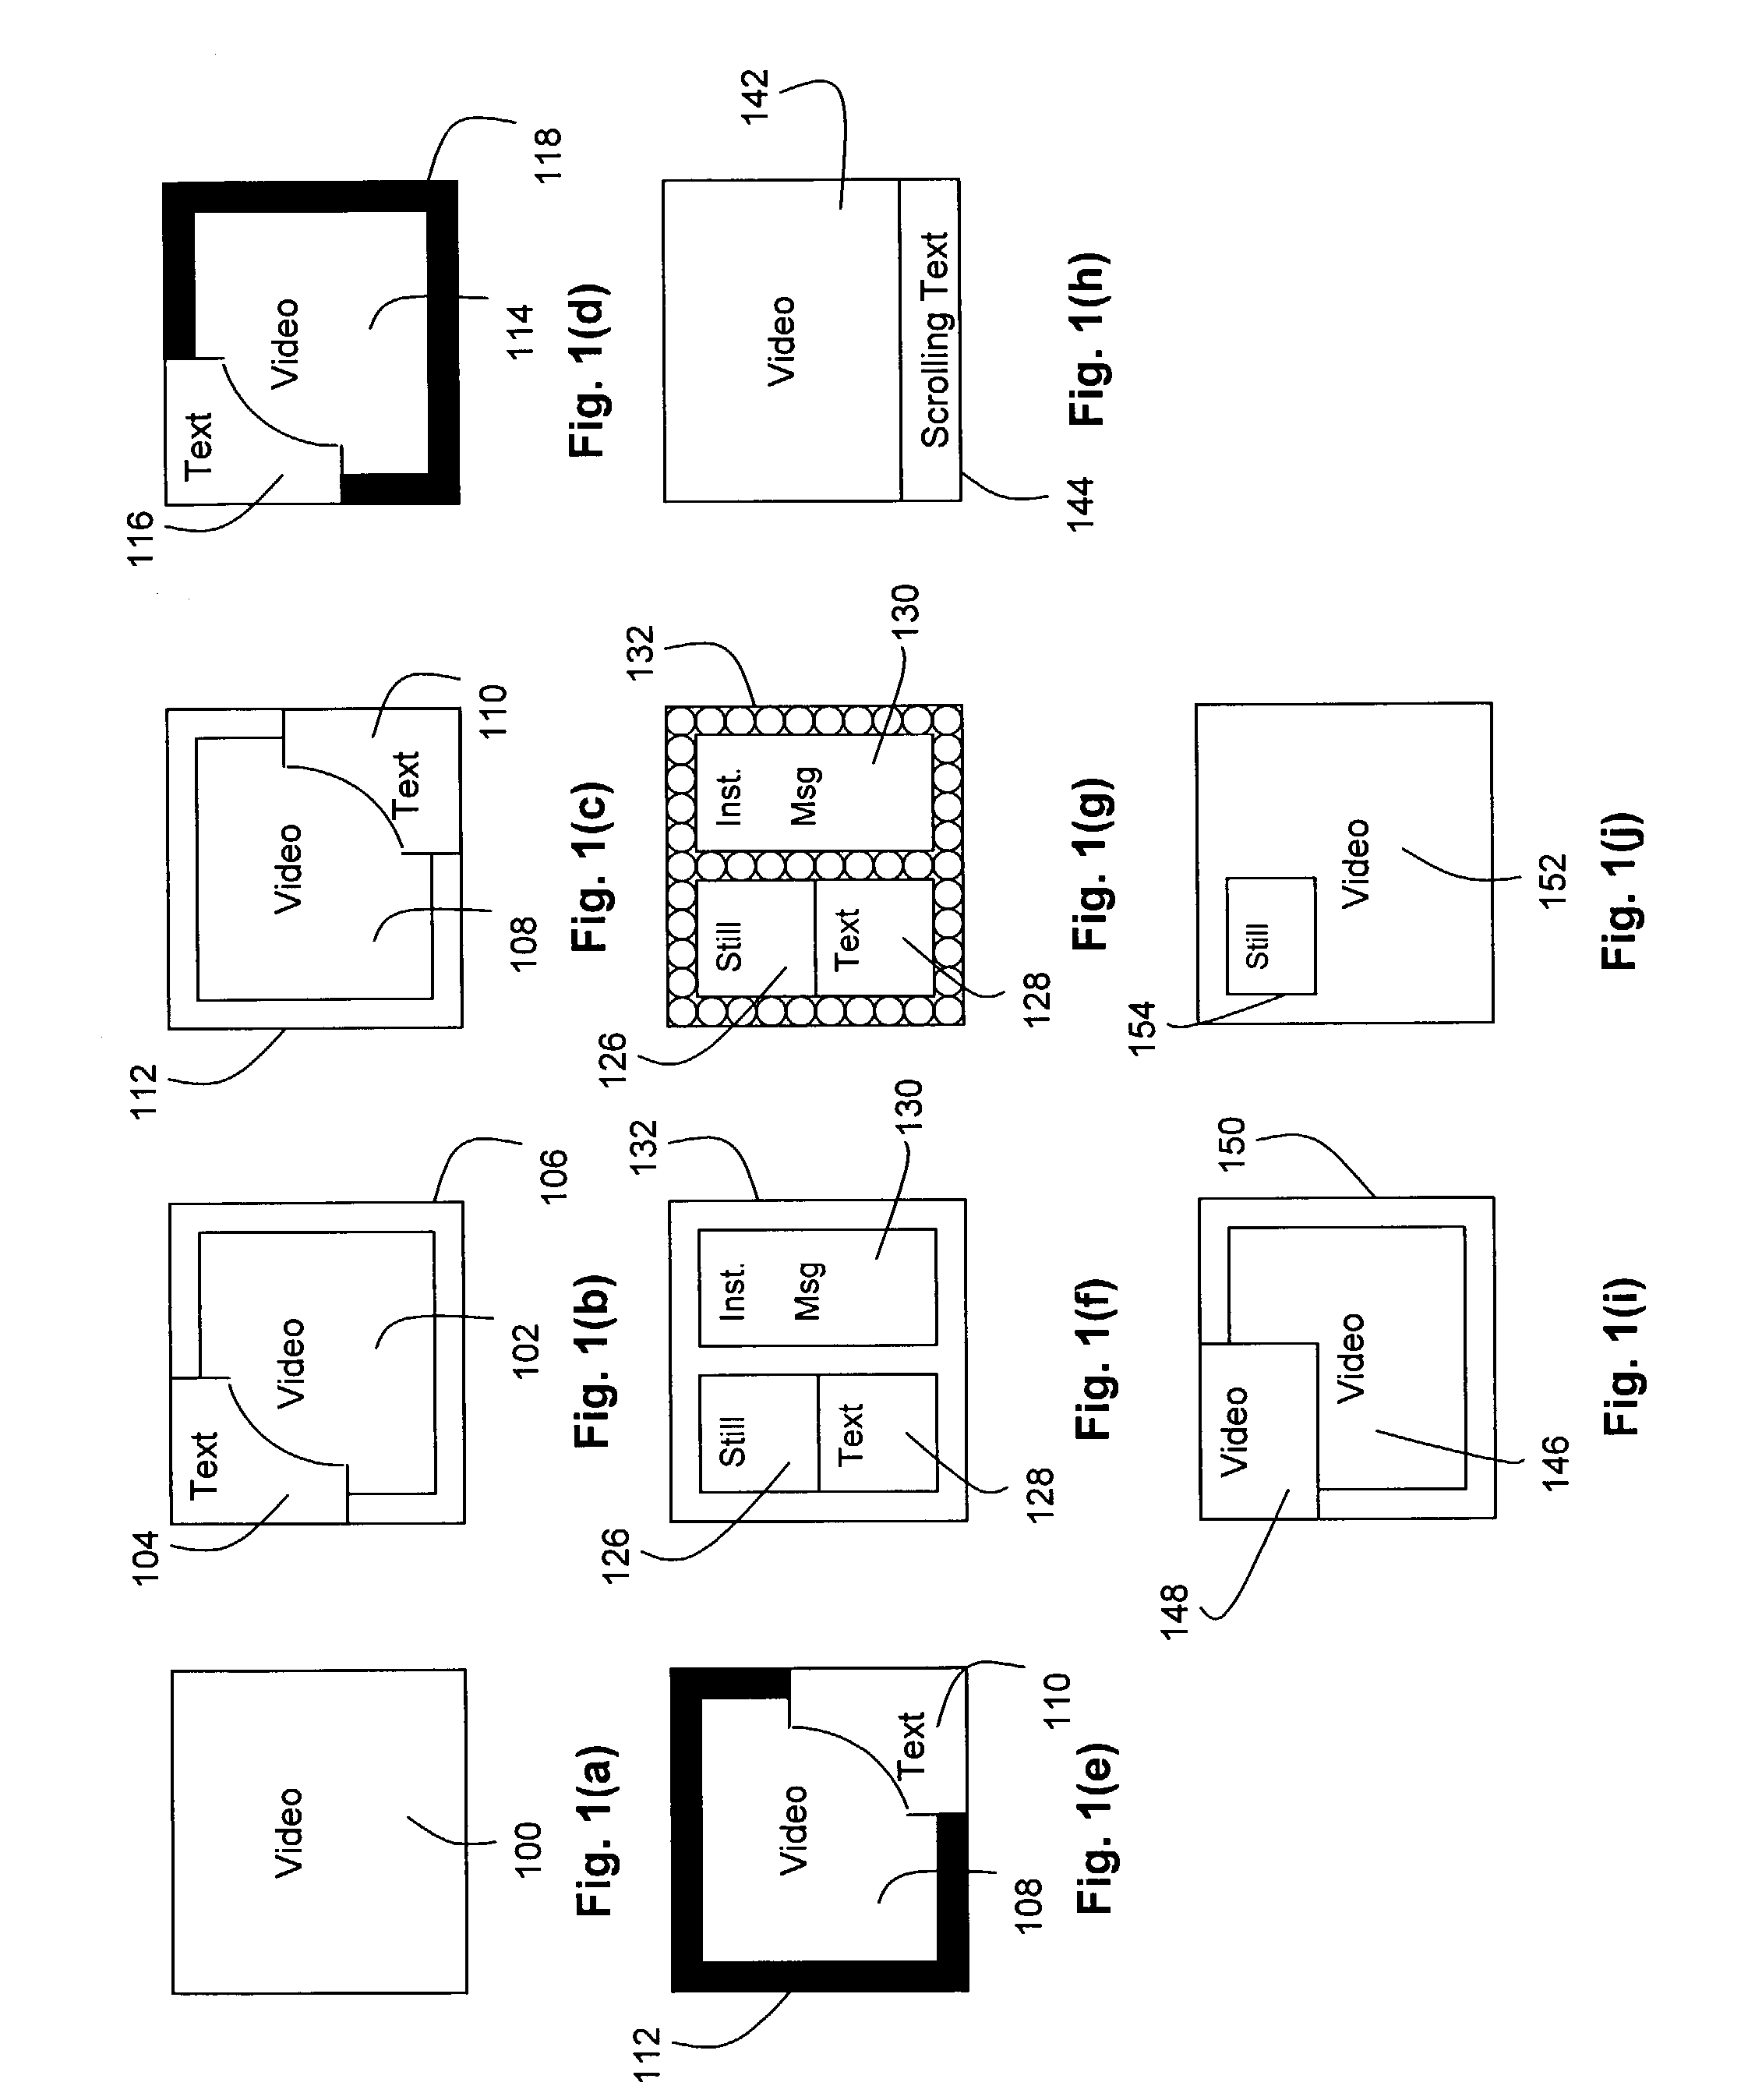 Method and apparatus for controlling the visual presentation of data